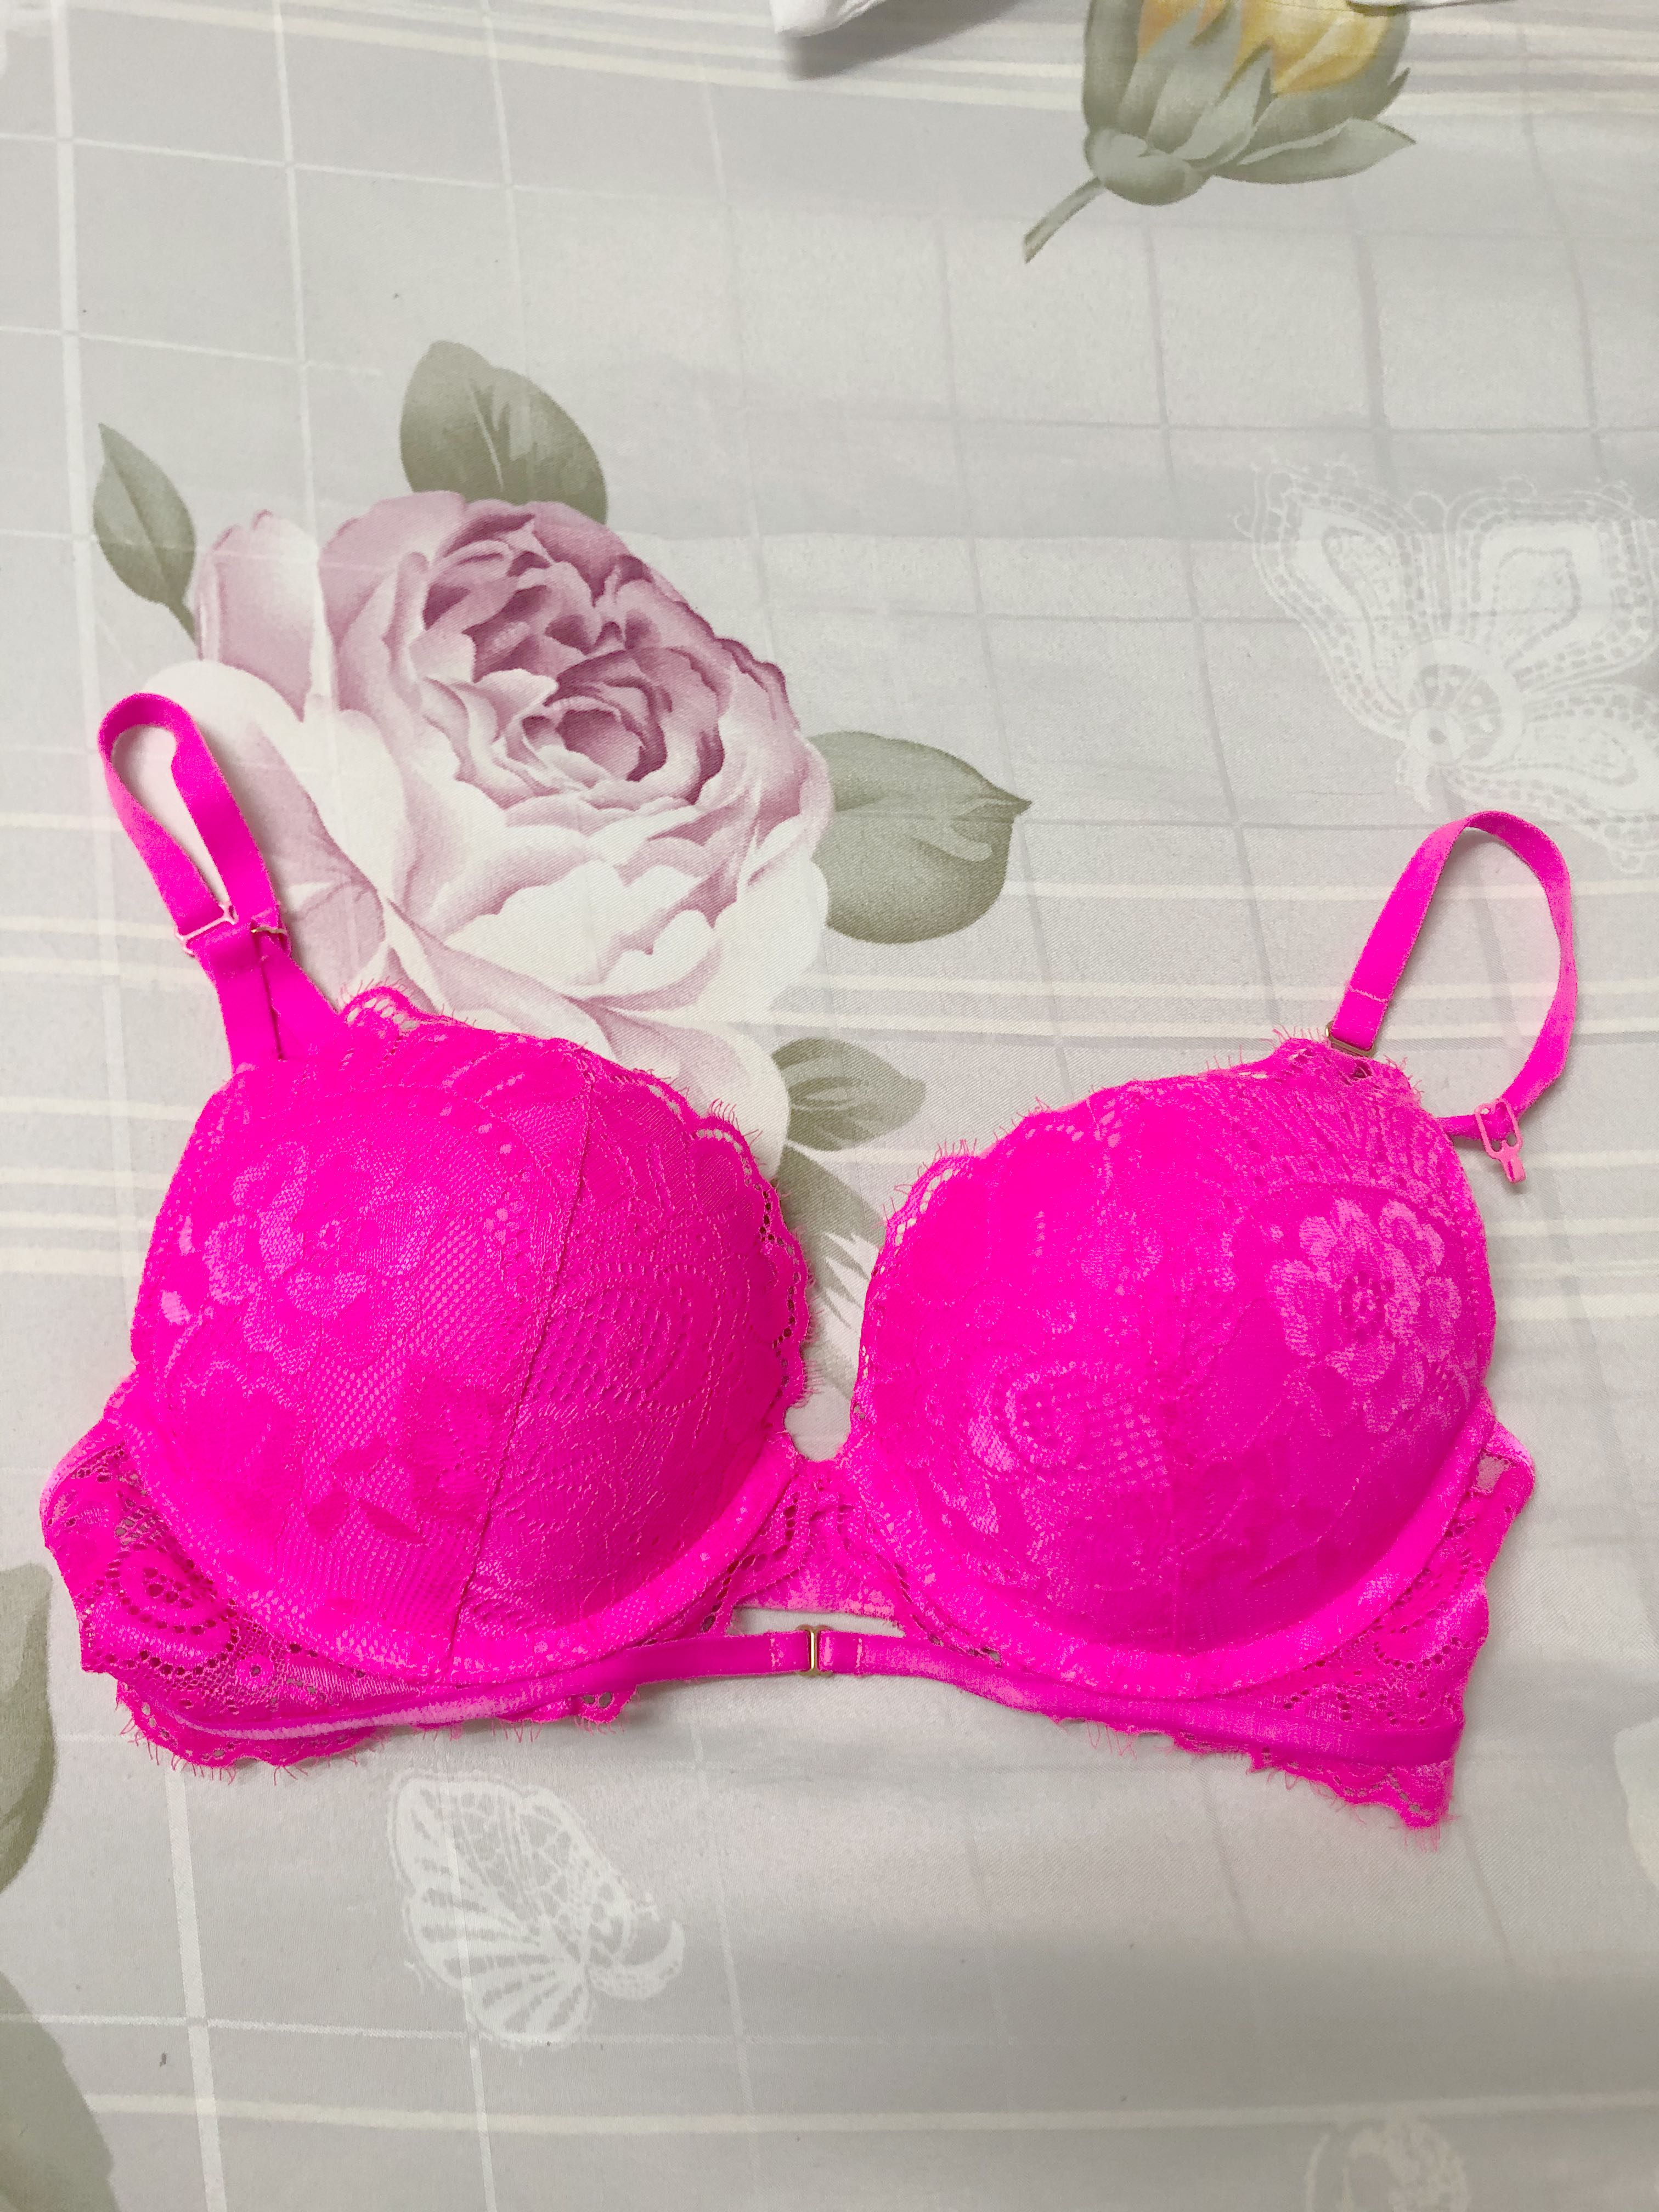 La Senza - TAKE THE PLUNGE: ALL NEW Beyond Sexy V-Wire Collection! The #1  Bra for low-cut sexy styles! Plus ---> Bras Now: Buy 1 Get 1 50% Off 🇨🇦 &  $25